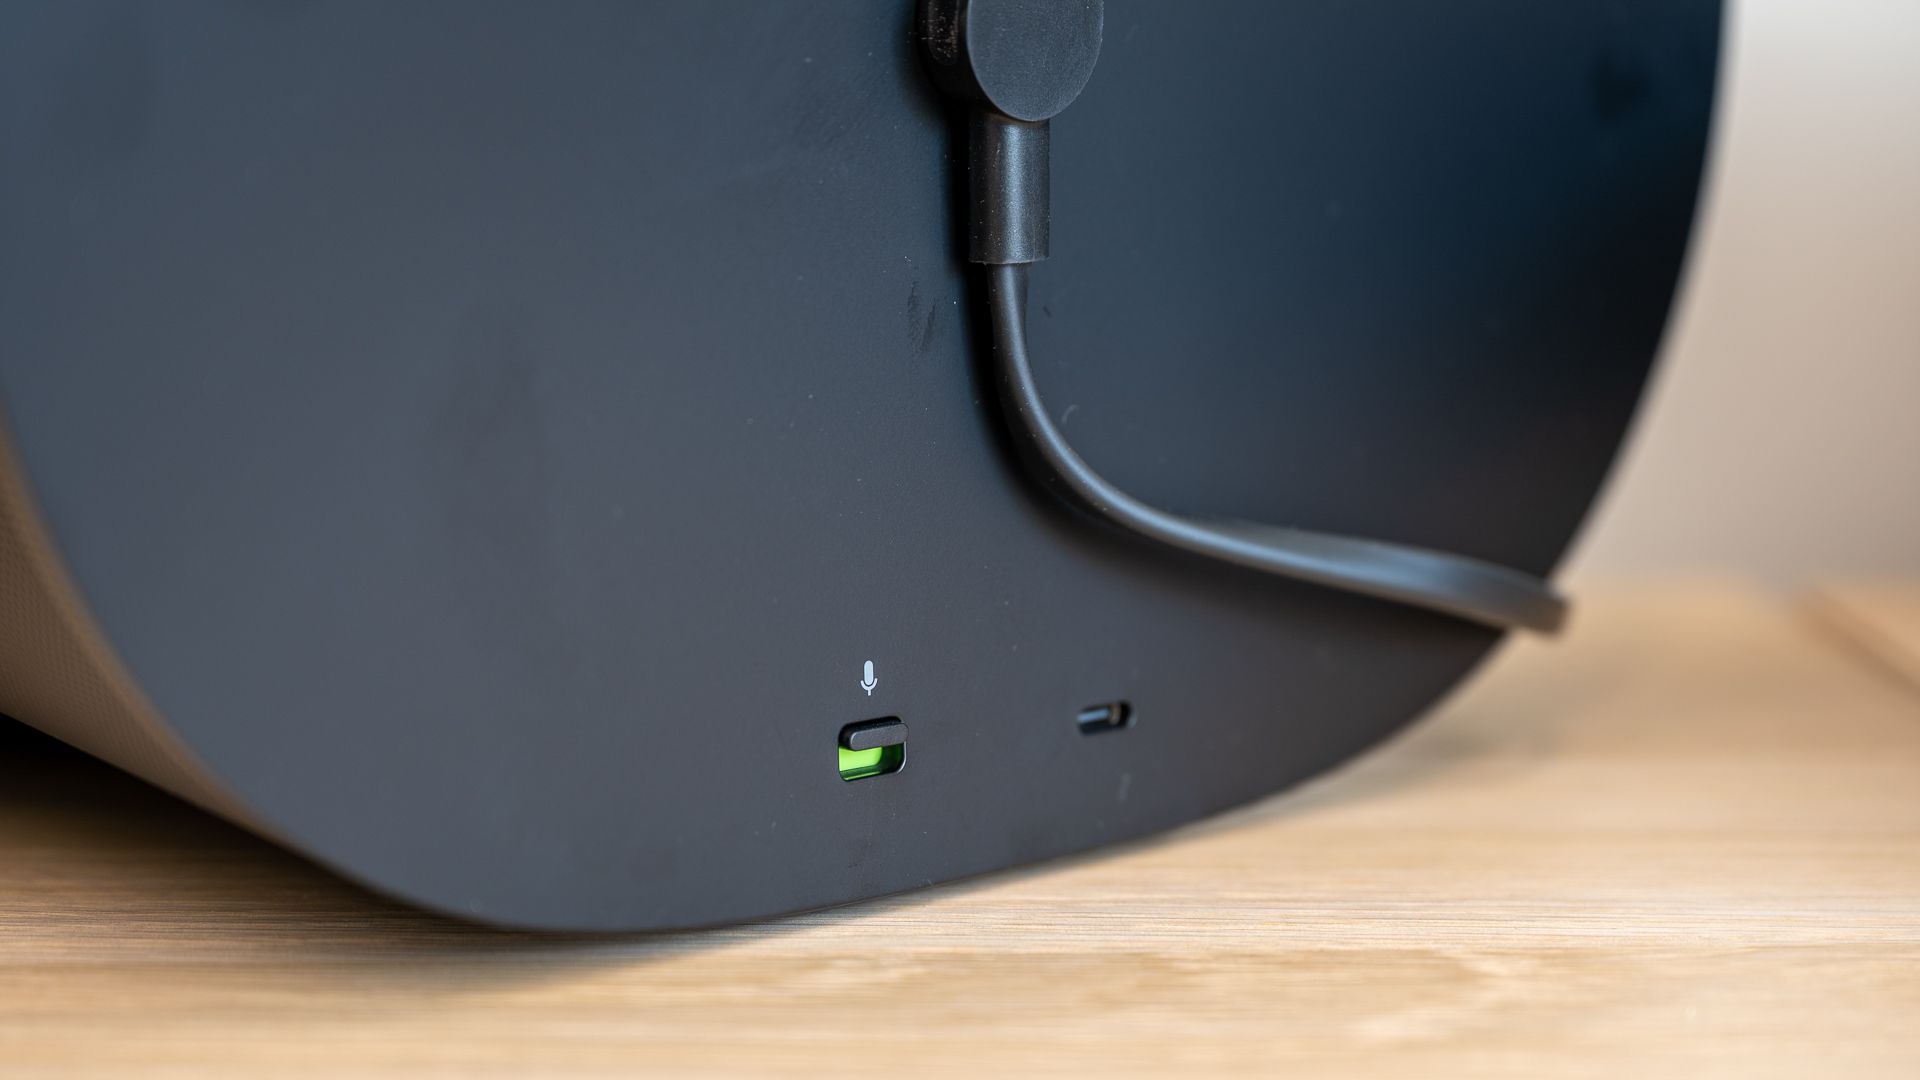 Mute switch, USB-C port, and power cable on the back of the Sonos Era 300